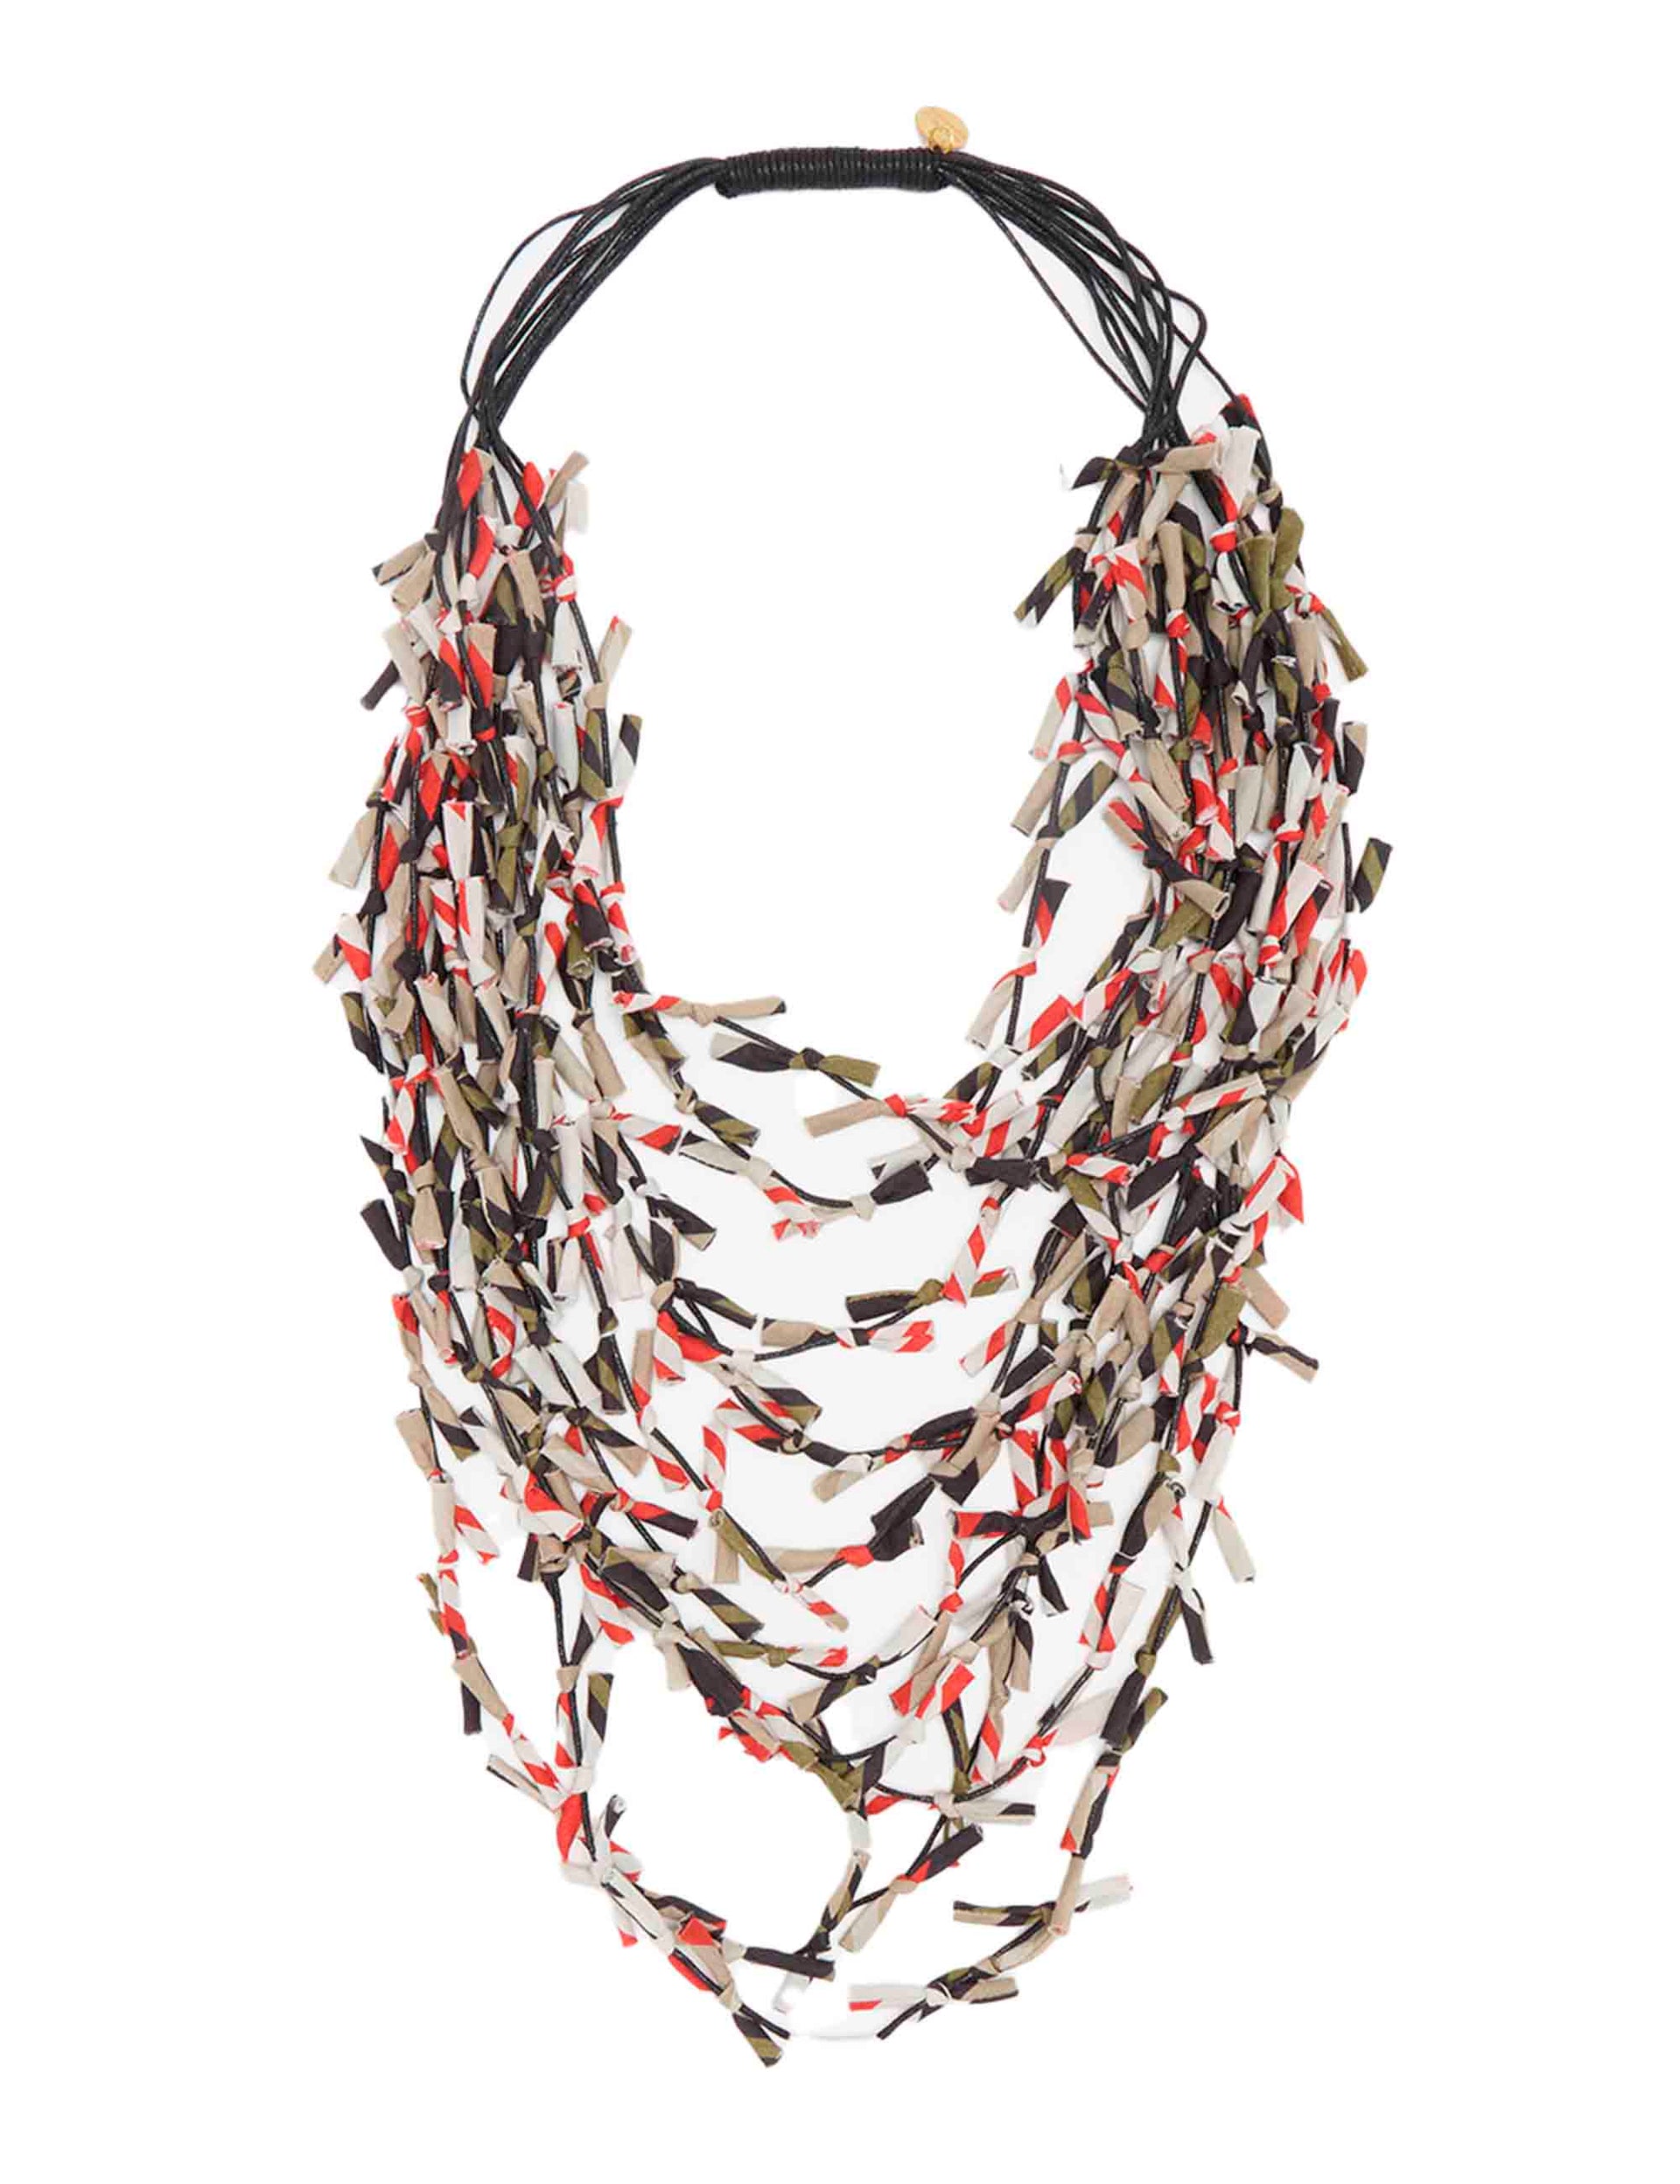 Fortuna's Stripes women's necklaces in patterned brown cotton